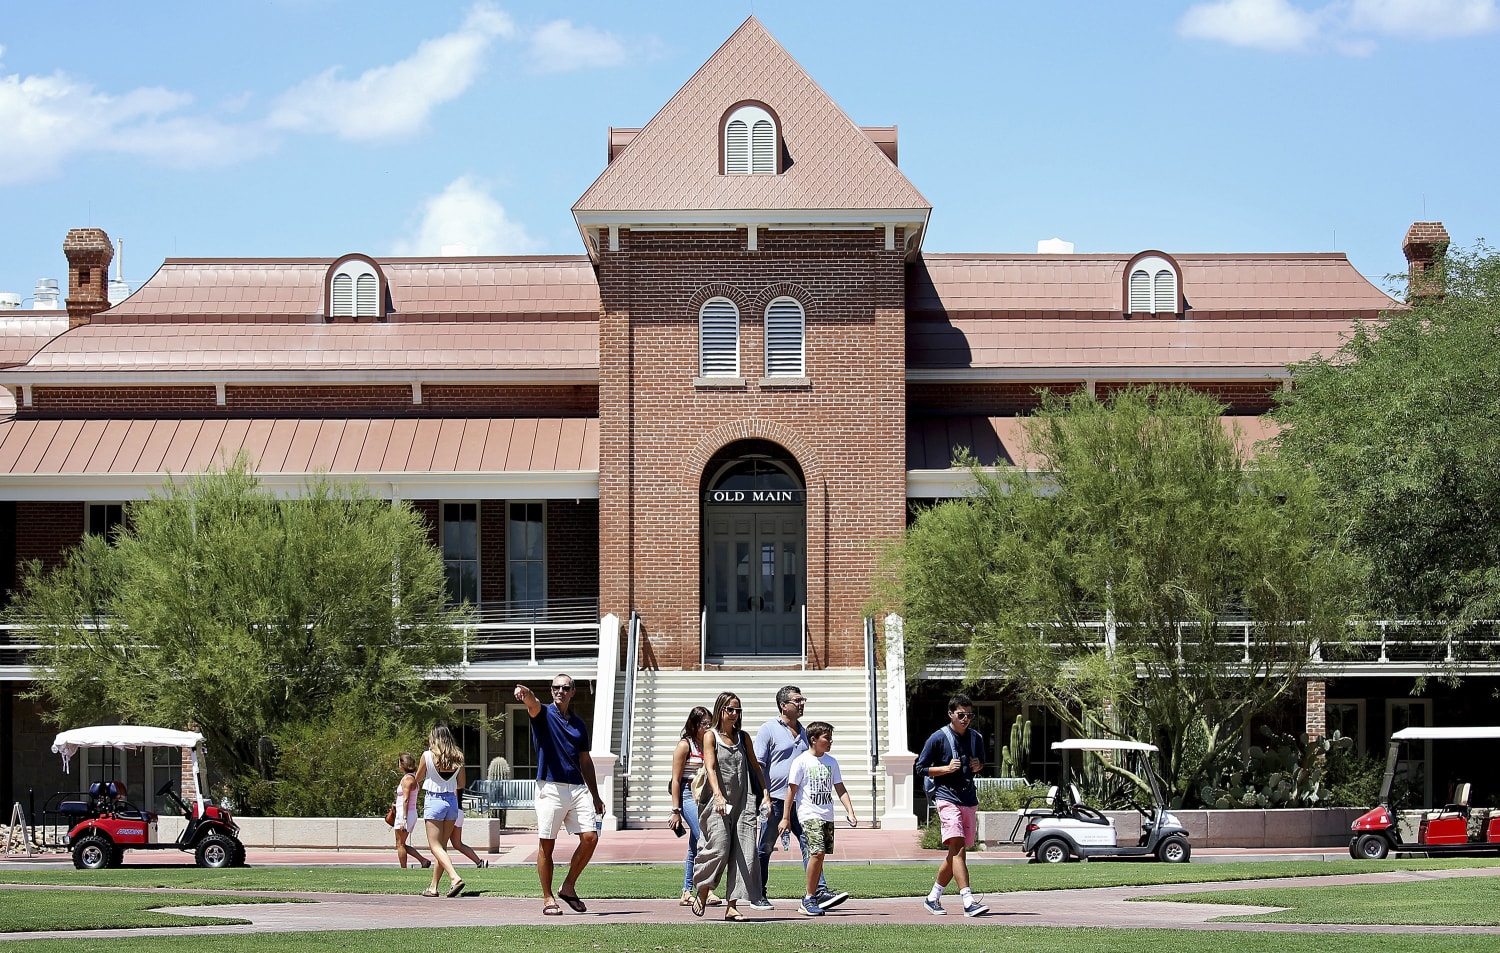 Two arrested in racist attack on black student at University of Arizona